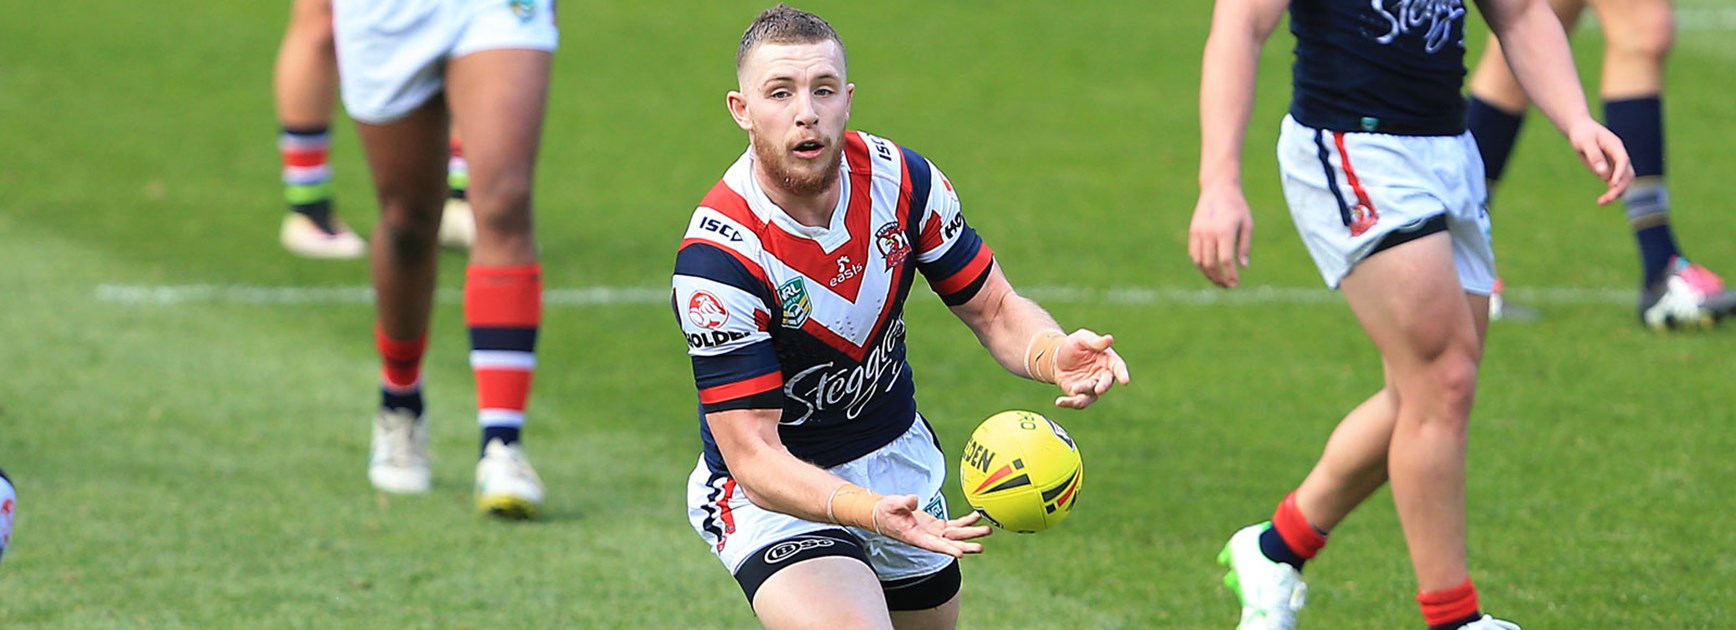 Roosters NYC playmaker Jackson Hastings booted seven goals against the Cowboys in Round 23.